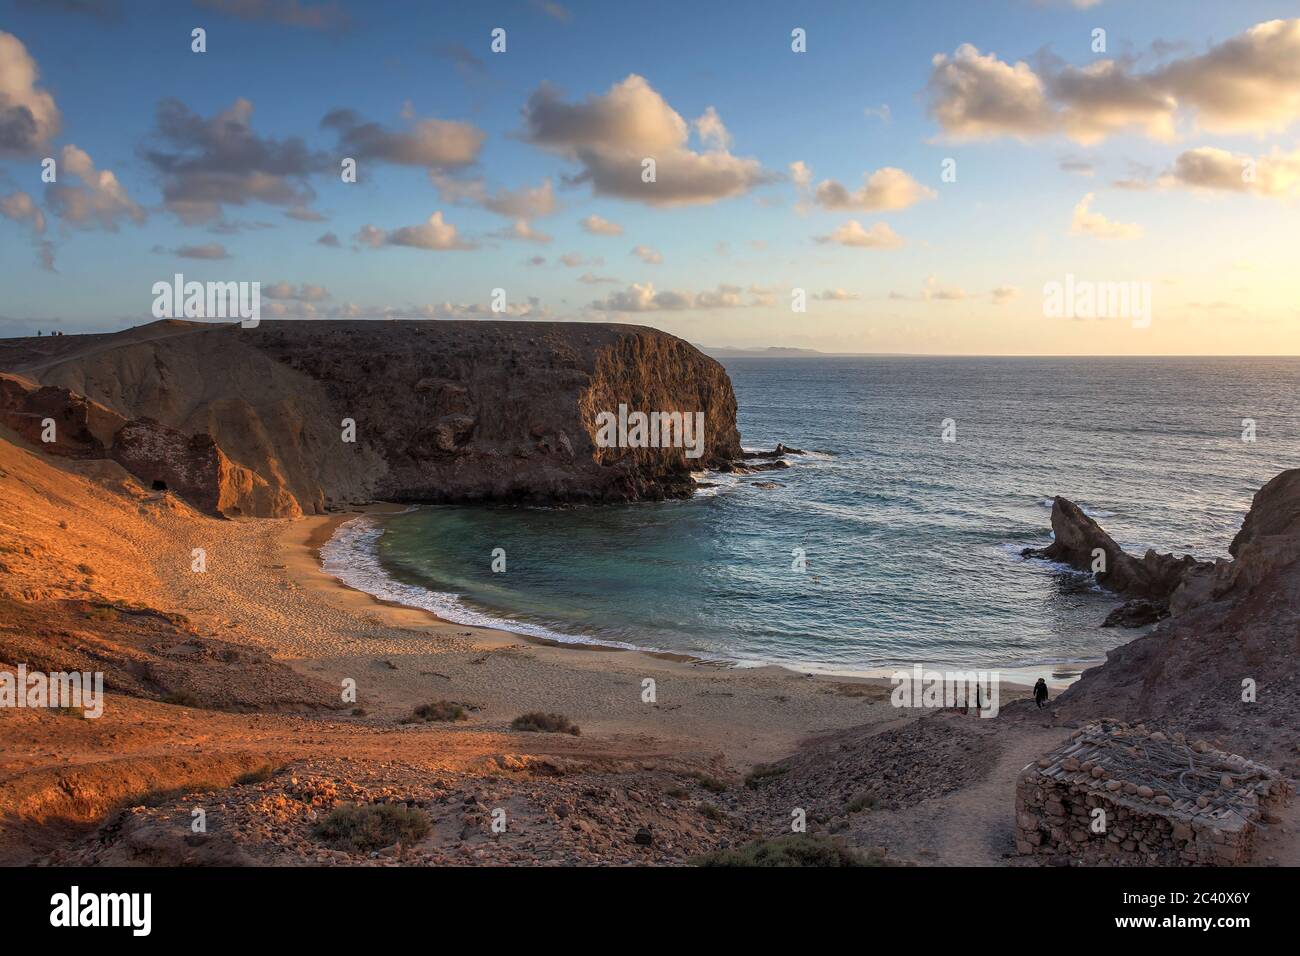 Landscape with the famous Papagayo Beach on the Lanzarote Island in the Canary Islands Ahipelago, Spain at sunset time. Stock Photo